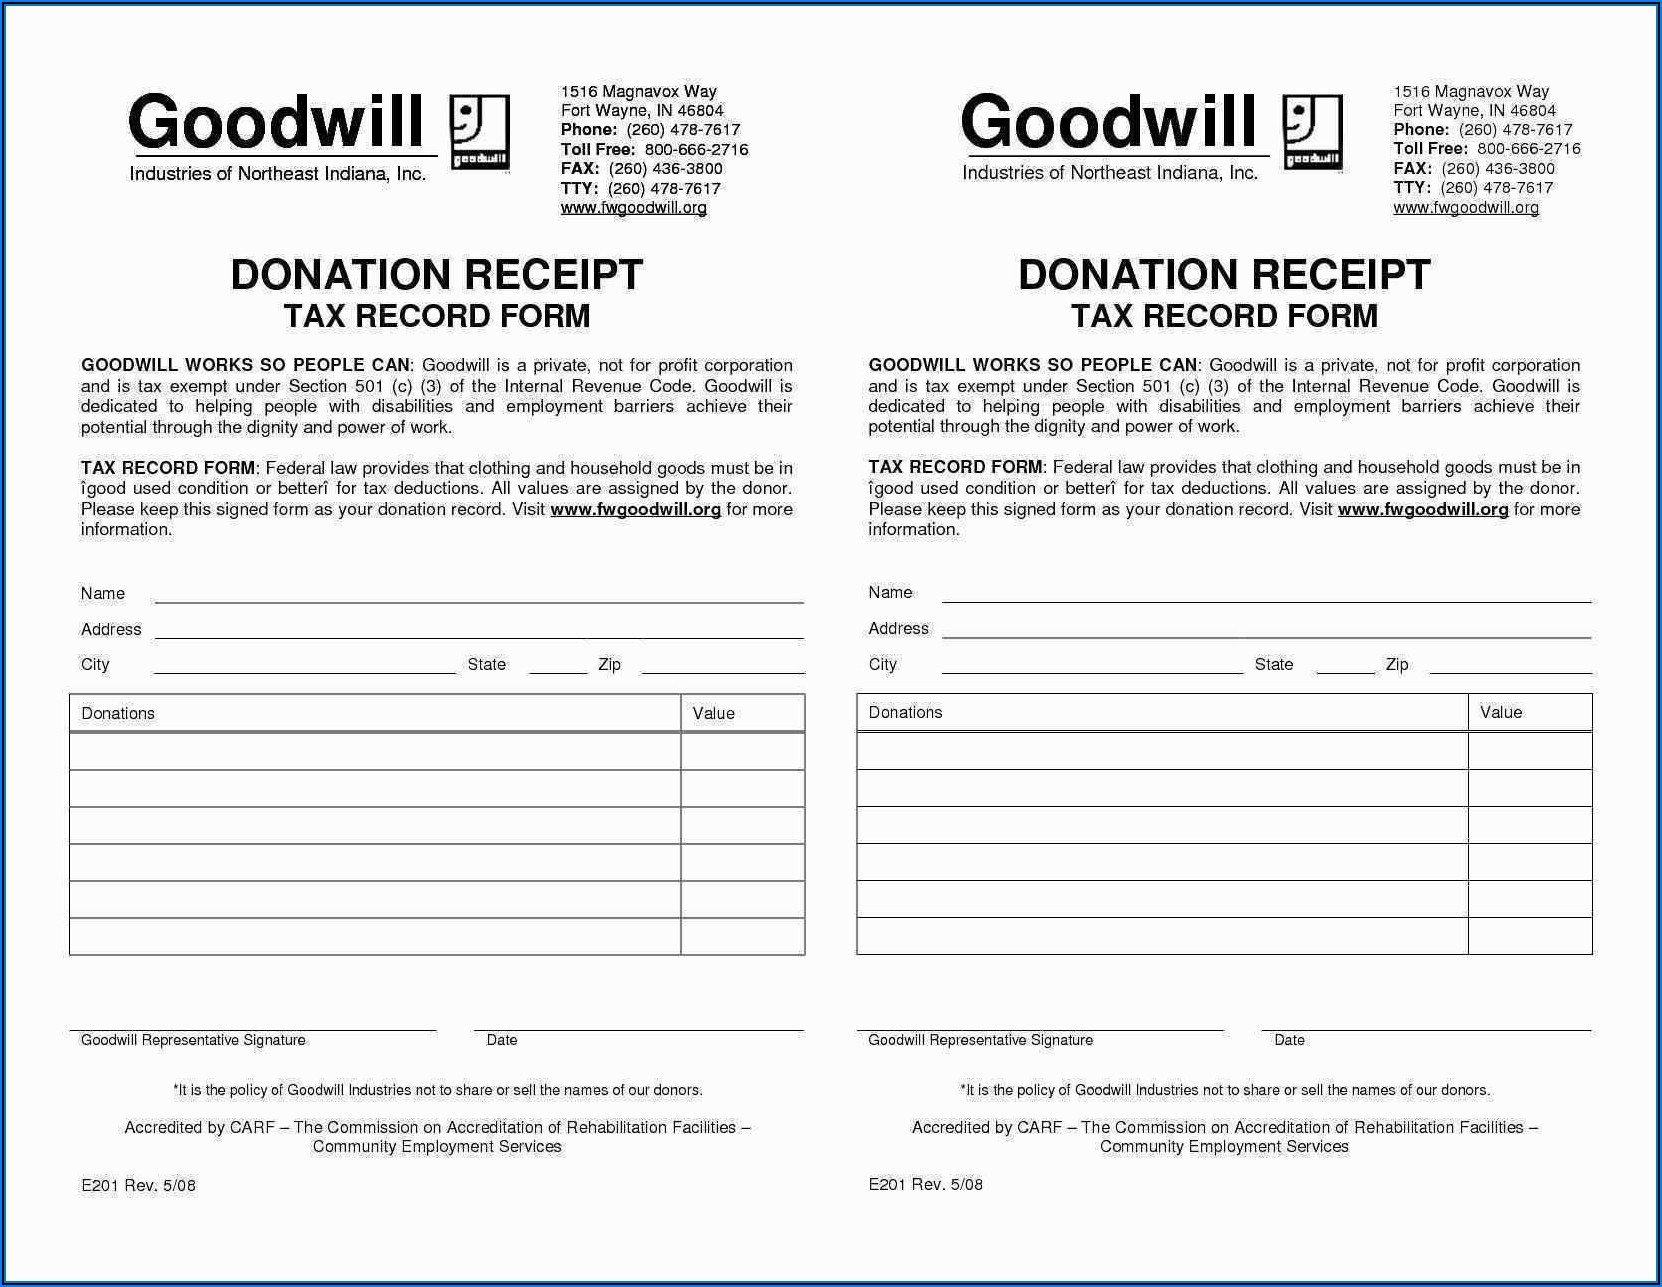 Goodwill Donation Forms Online